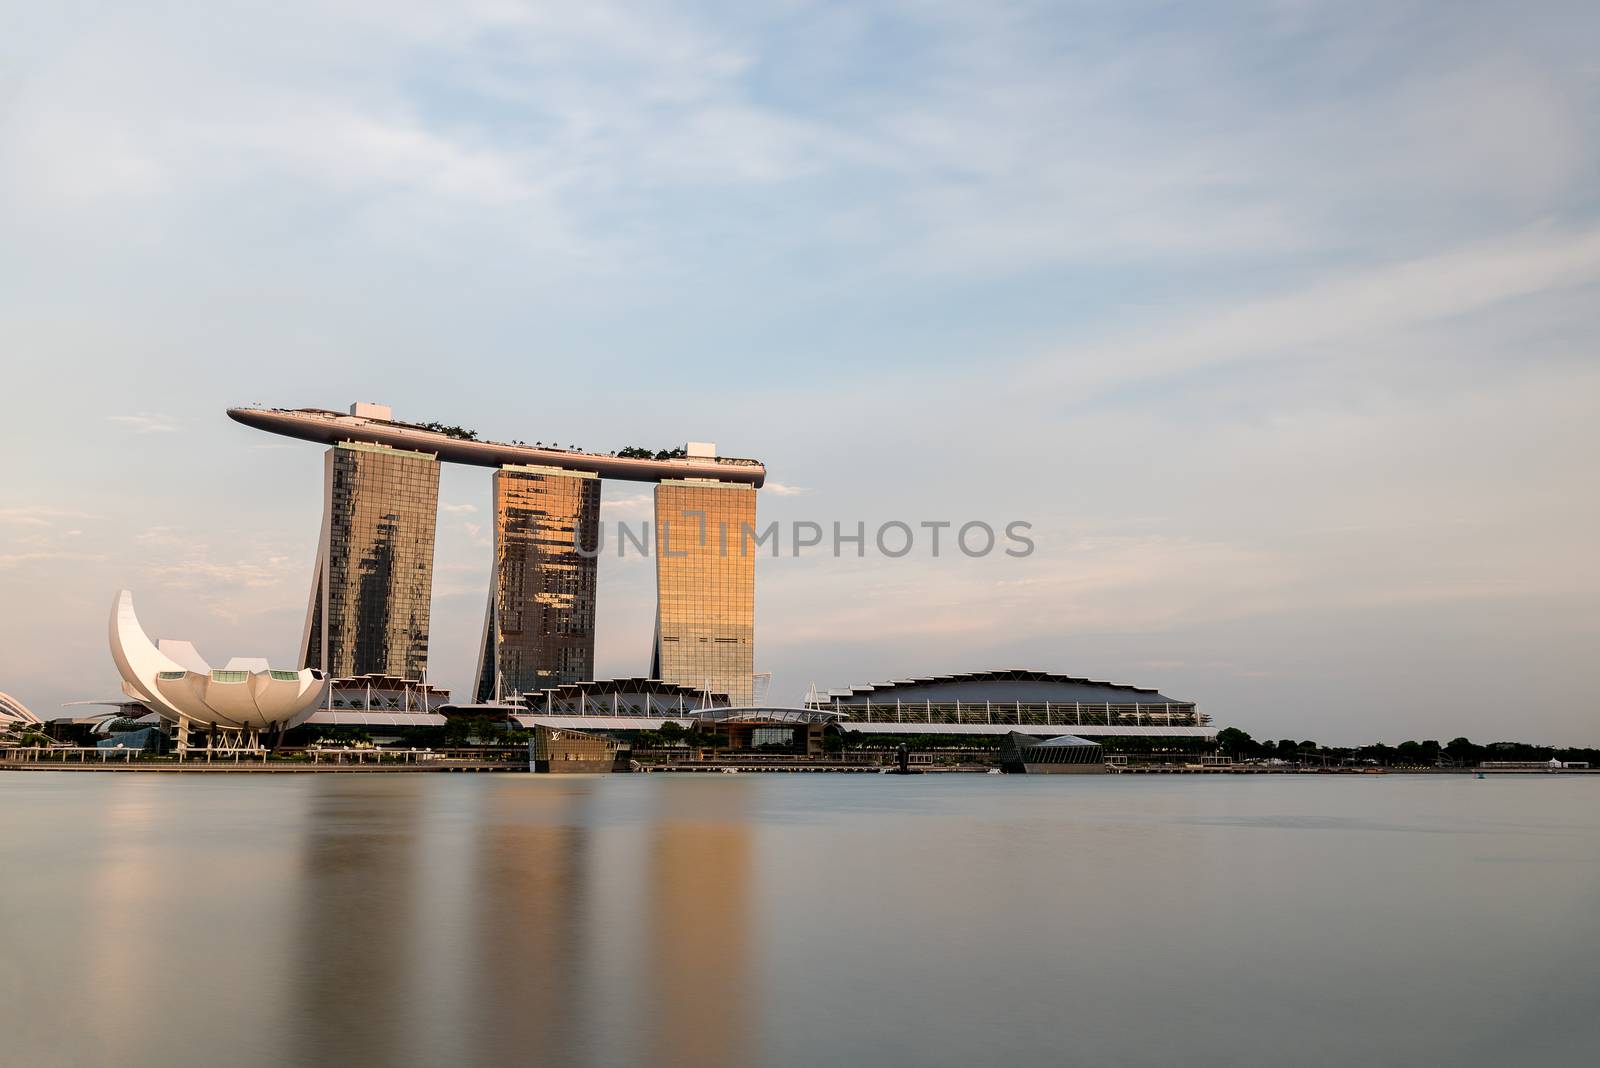 MARINA BAY SANDS, SINGAPORE - May 23, 2017: Marina Bay Hotel at Singapore in the sunset time with blue sky background and waterfront reflection.